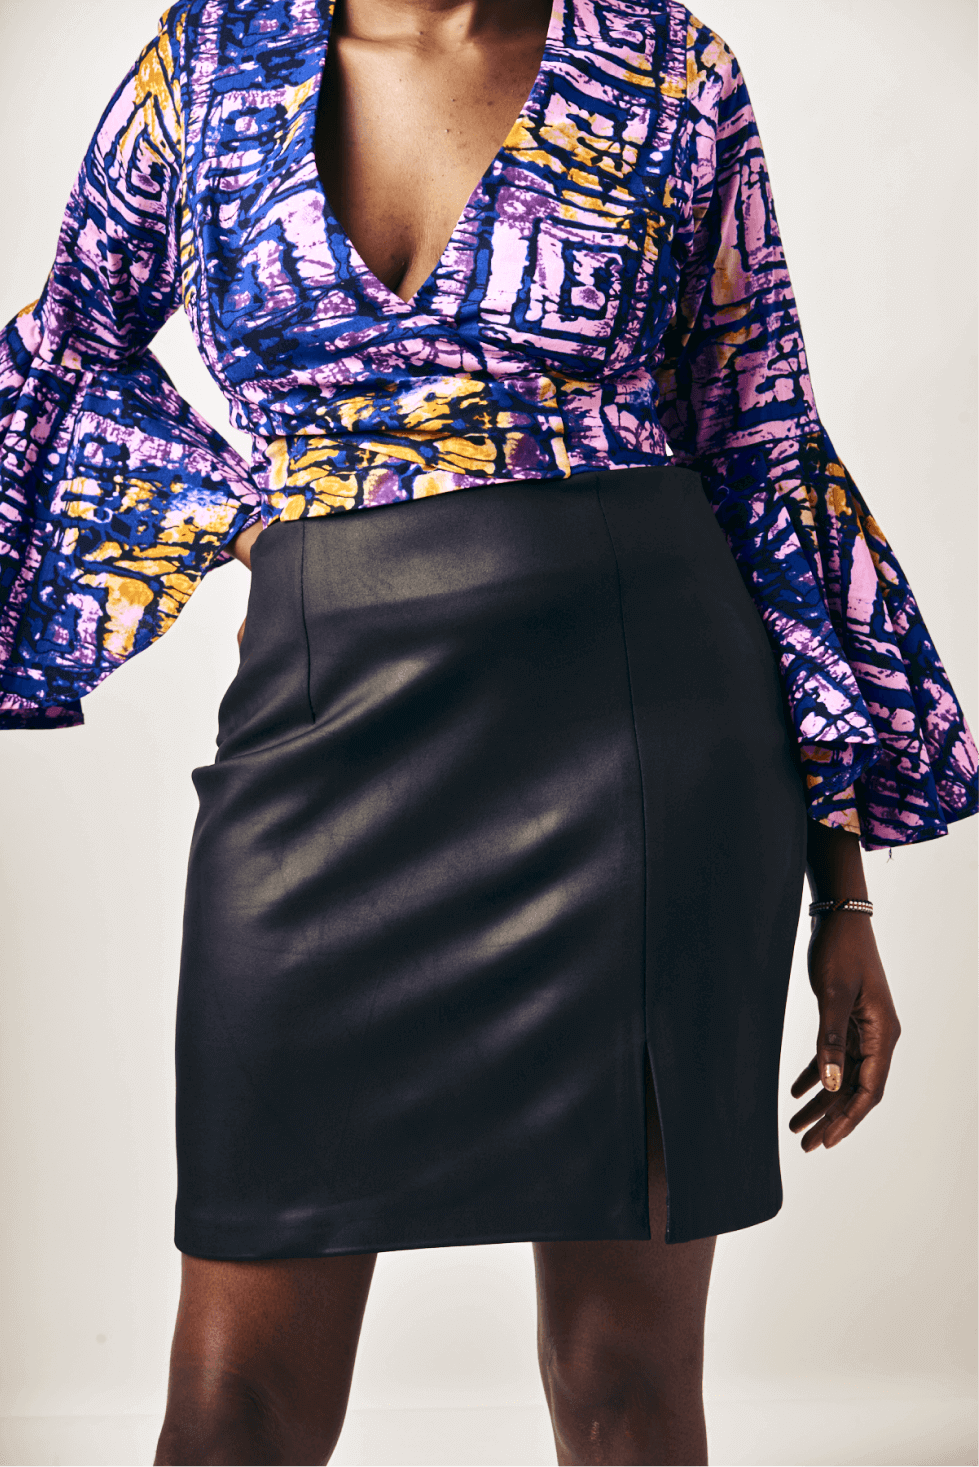 Shop Chera Vegan Leather Mini Skirt by Cyami Custom Fit on Arrai. Discover stylish, affordable clothing, jewelry, handbags and unique handmade pieces from top Kenyan & African fashion brands prioritising sustainability and quality craftsmanship.